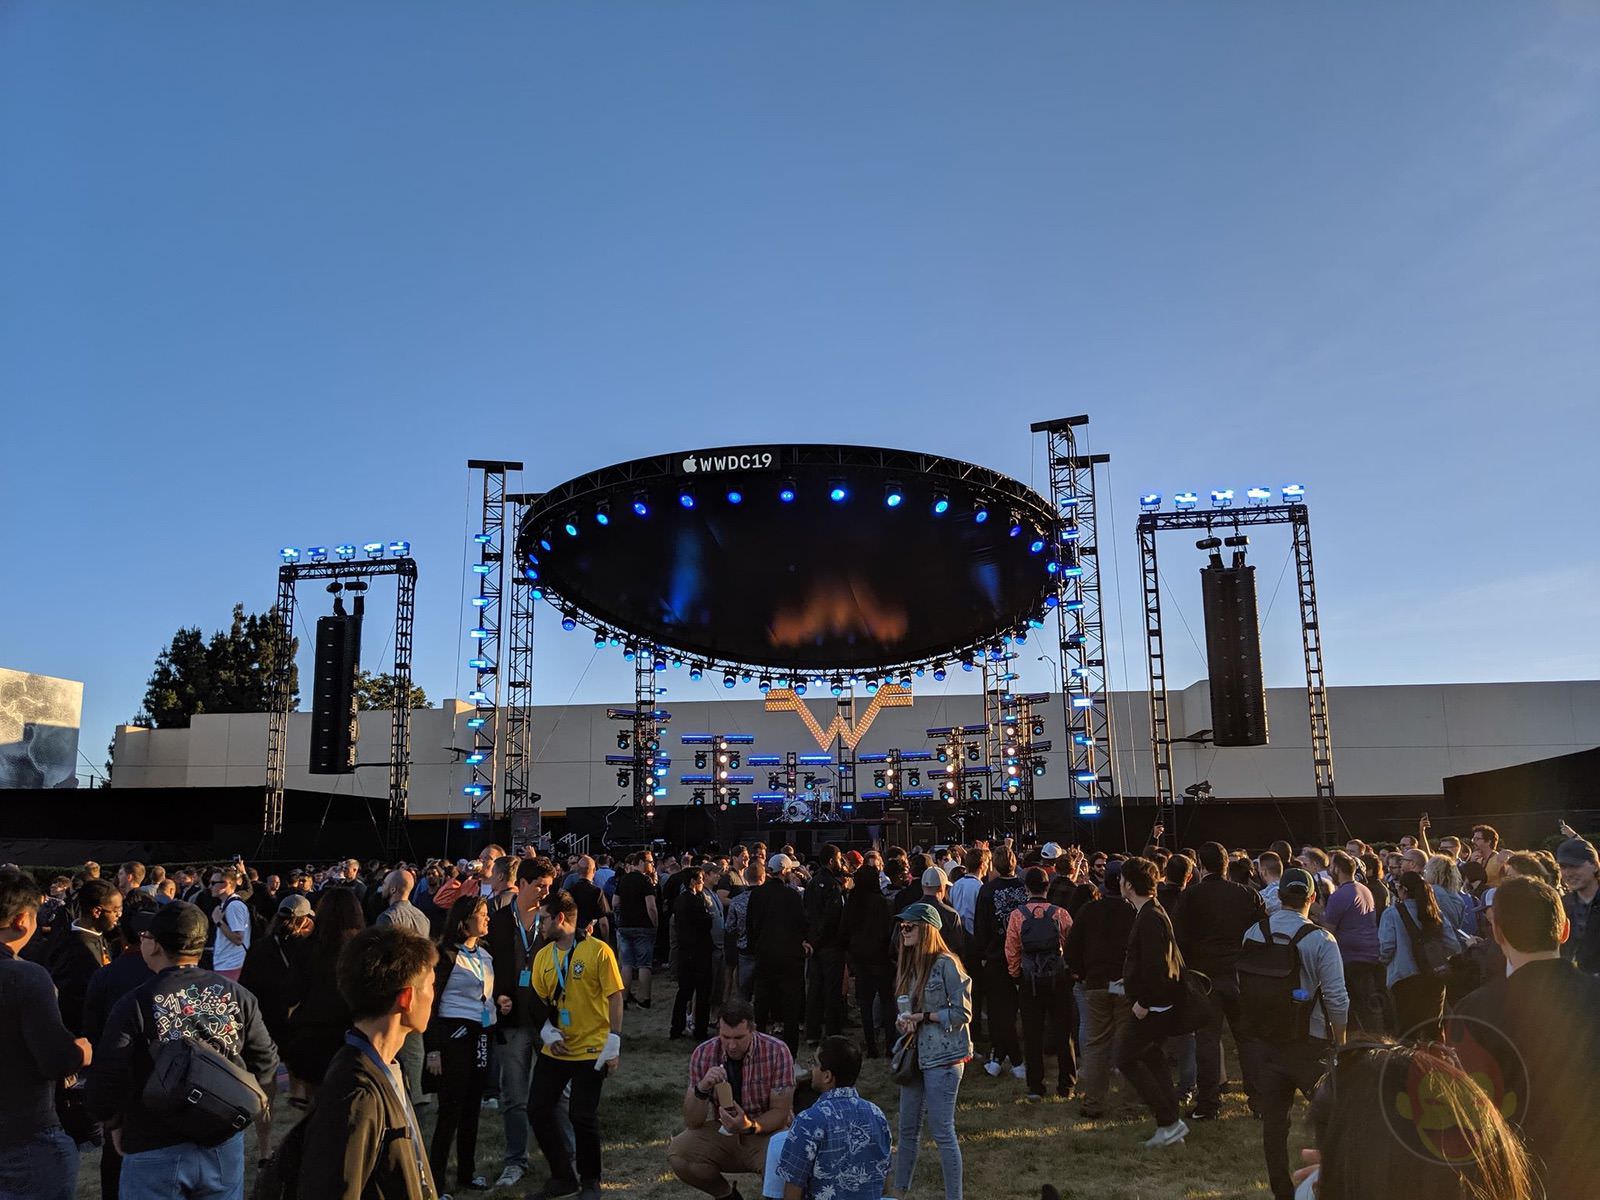 Weezer-plays-at-WWDC19-Afterparty-06.jpg